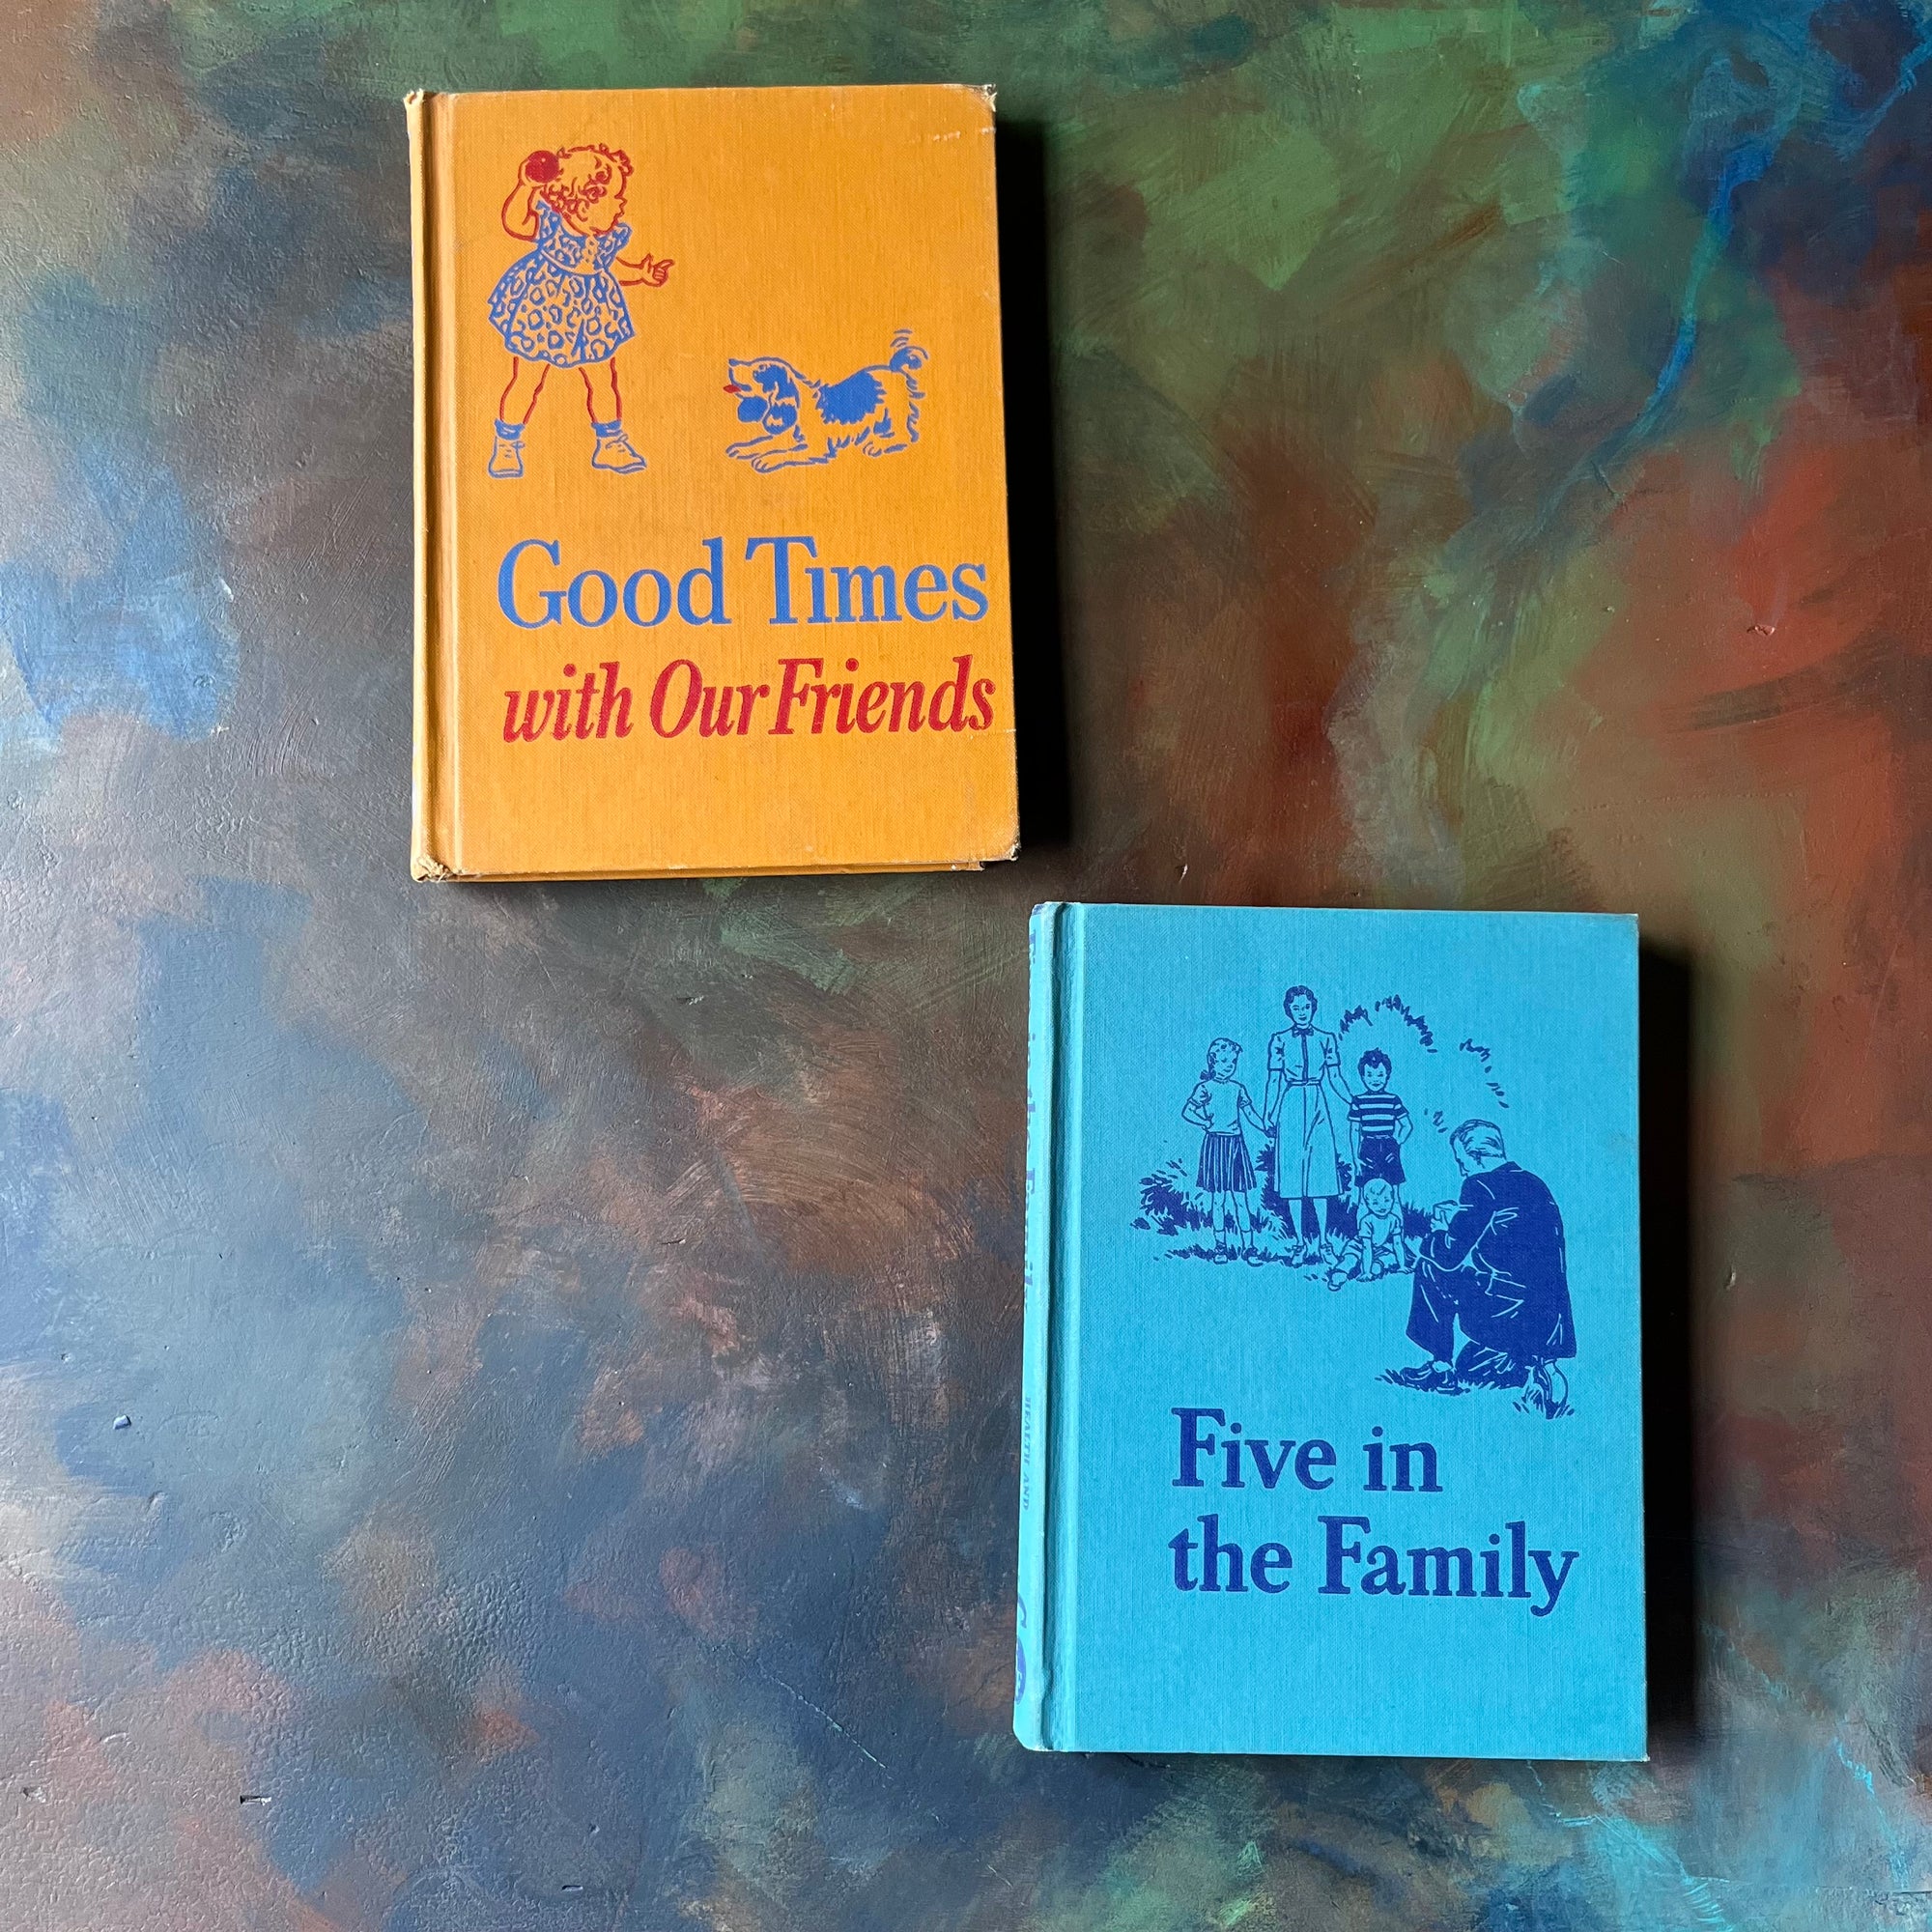 Pair of Health & Personal Development Curriculum Series-Good Times with Our Friends & Five in the Family-vintage schoolbooks-view of the front covers with illustrations & titles - one cover is orange & the other is blue